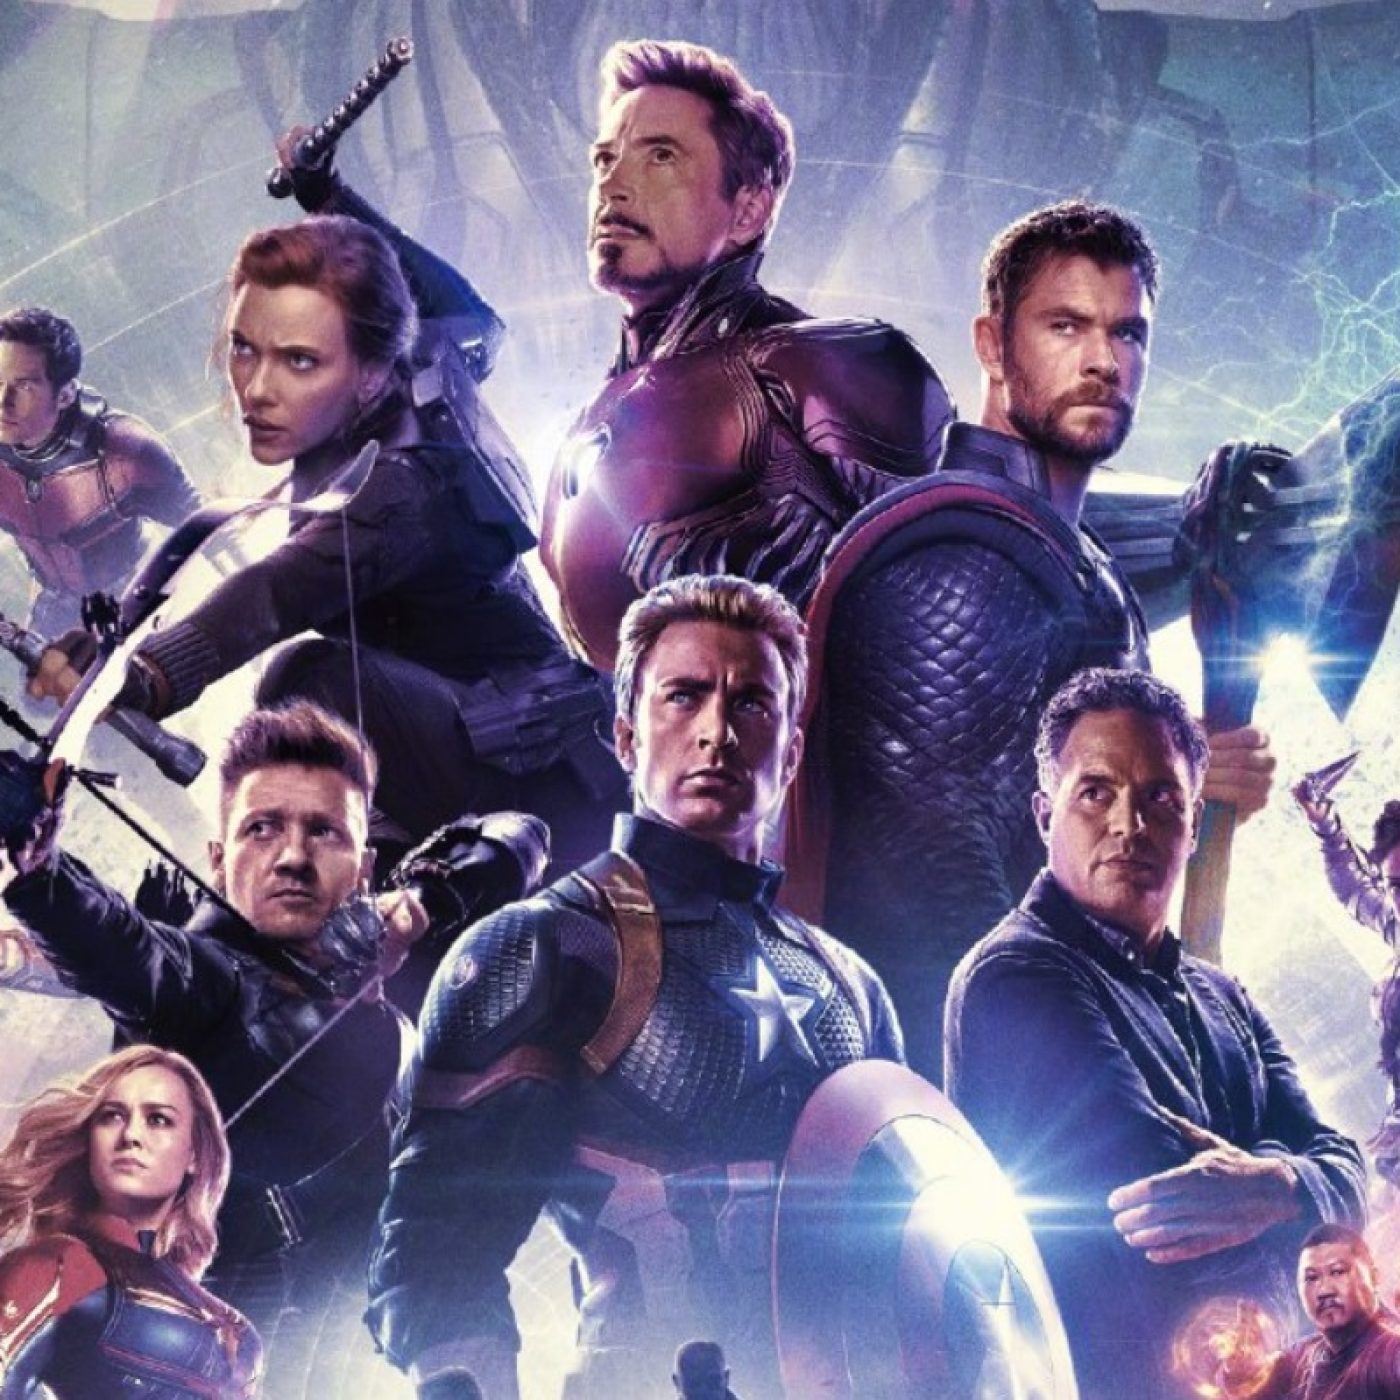 Marvel's Avengers: Endgame: spoilers, reviews, news, and analysis